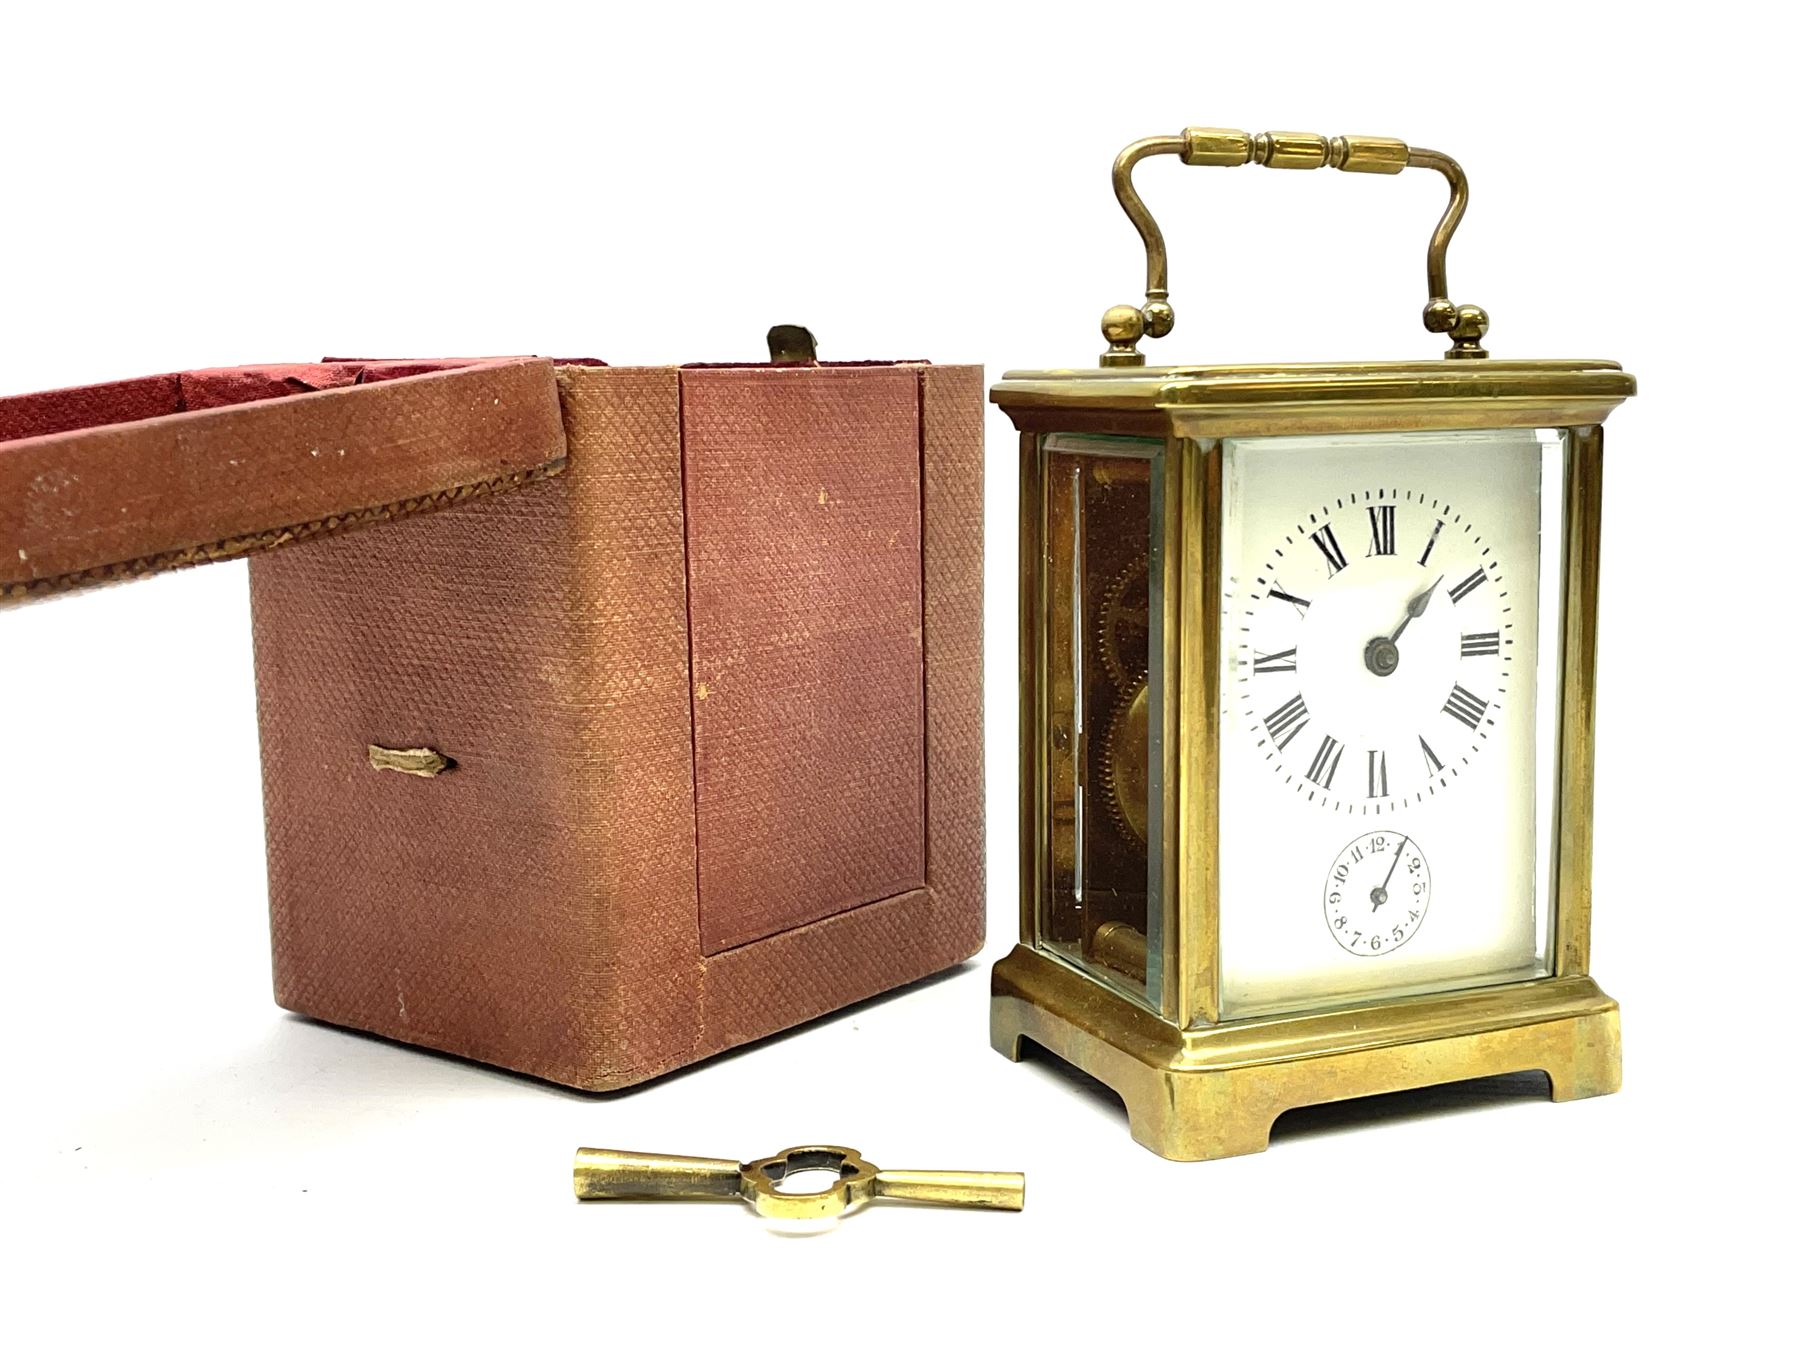 Early 20th century brass and bevel glazed carriage alarm clock